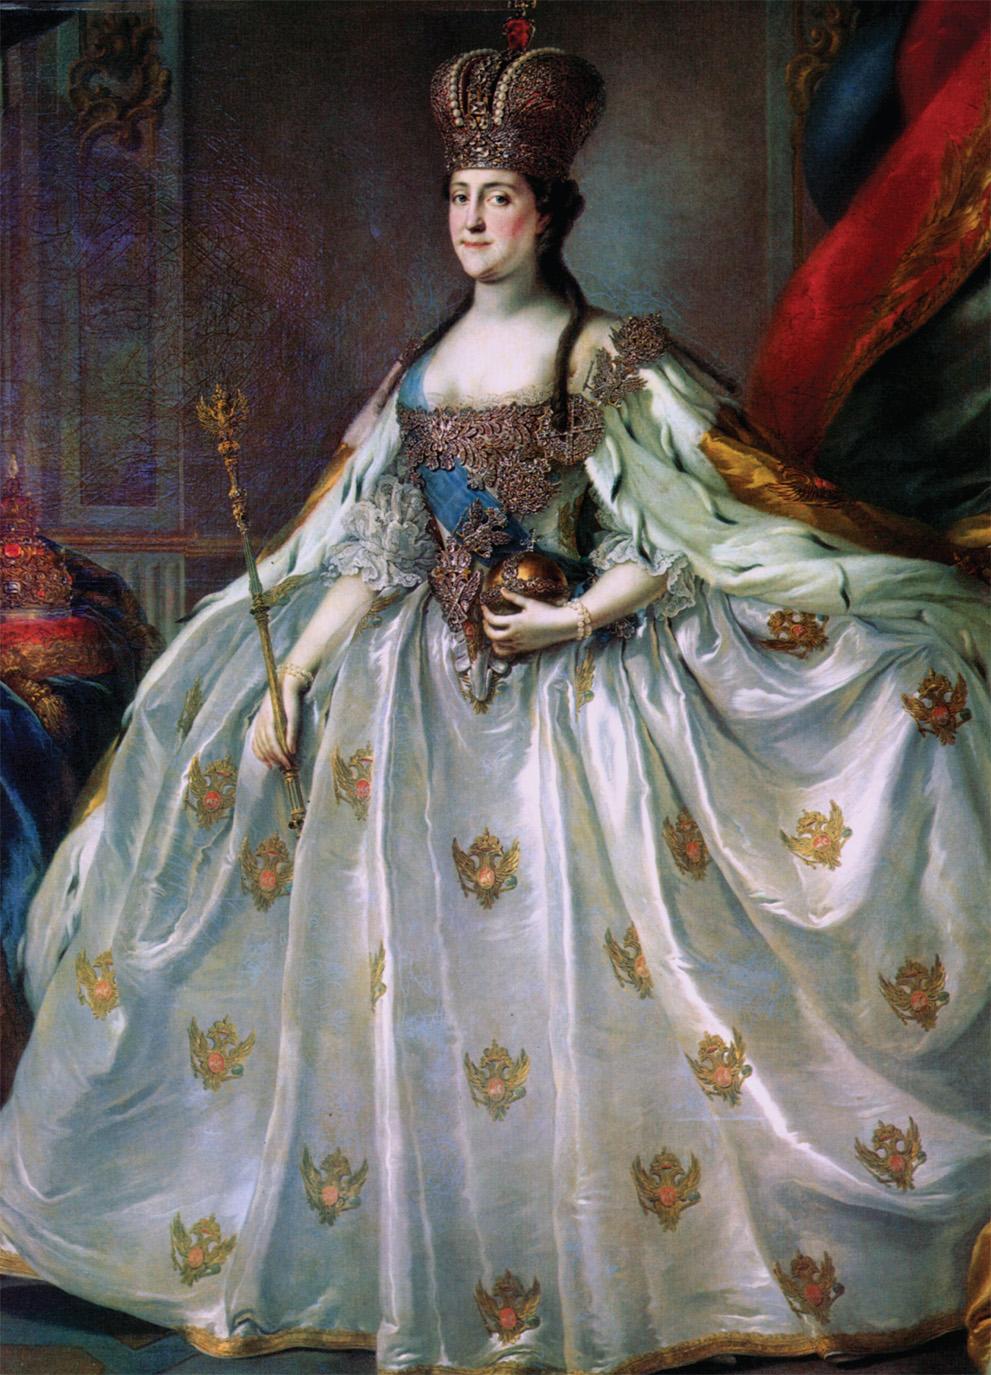 Catherine the Great ascended to the Russian throne after the murder of her husband.